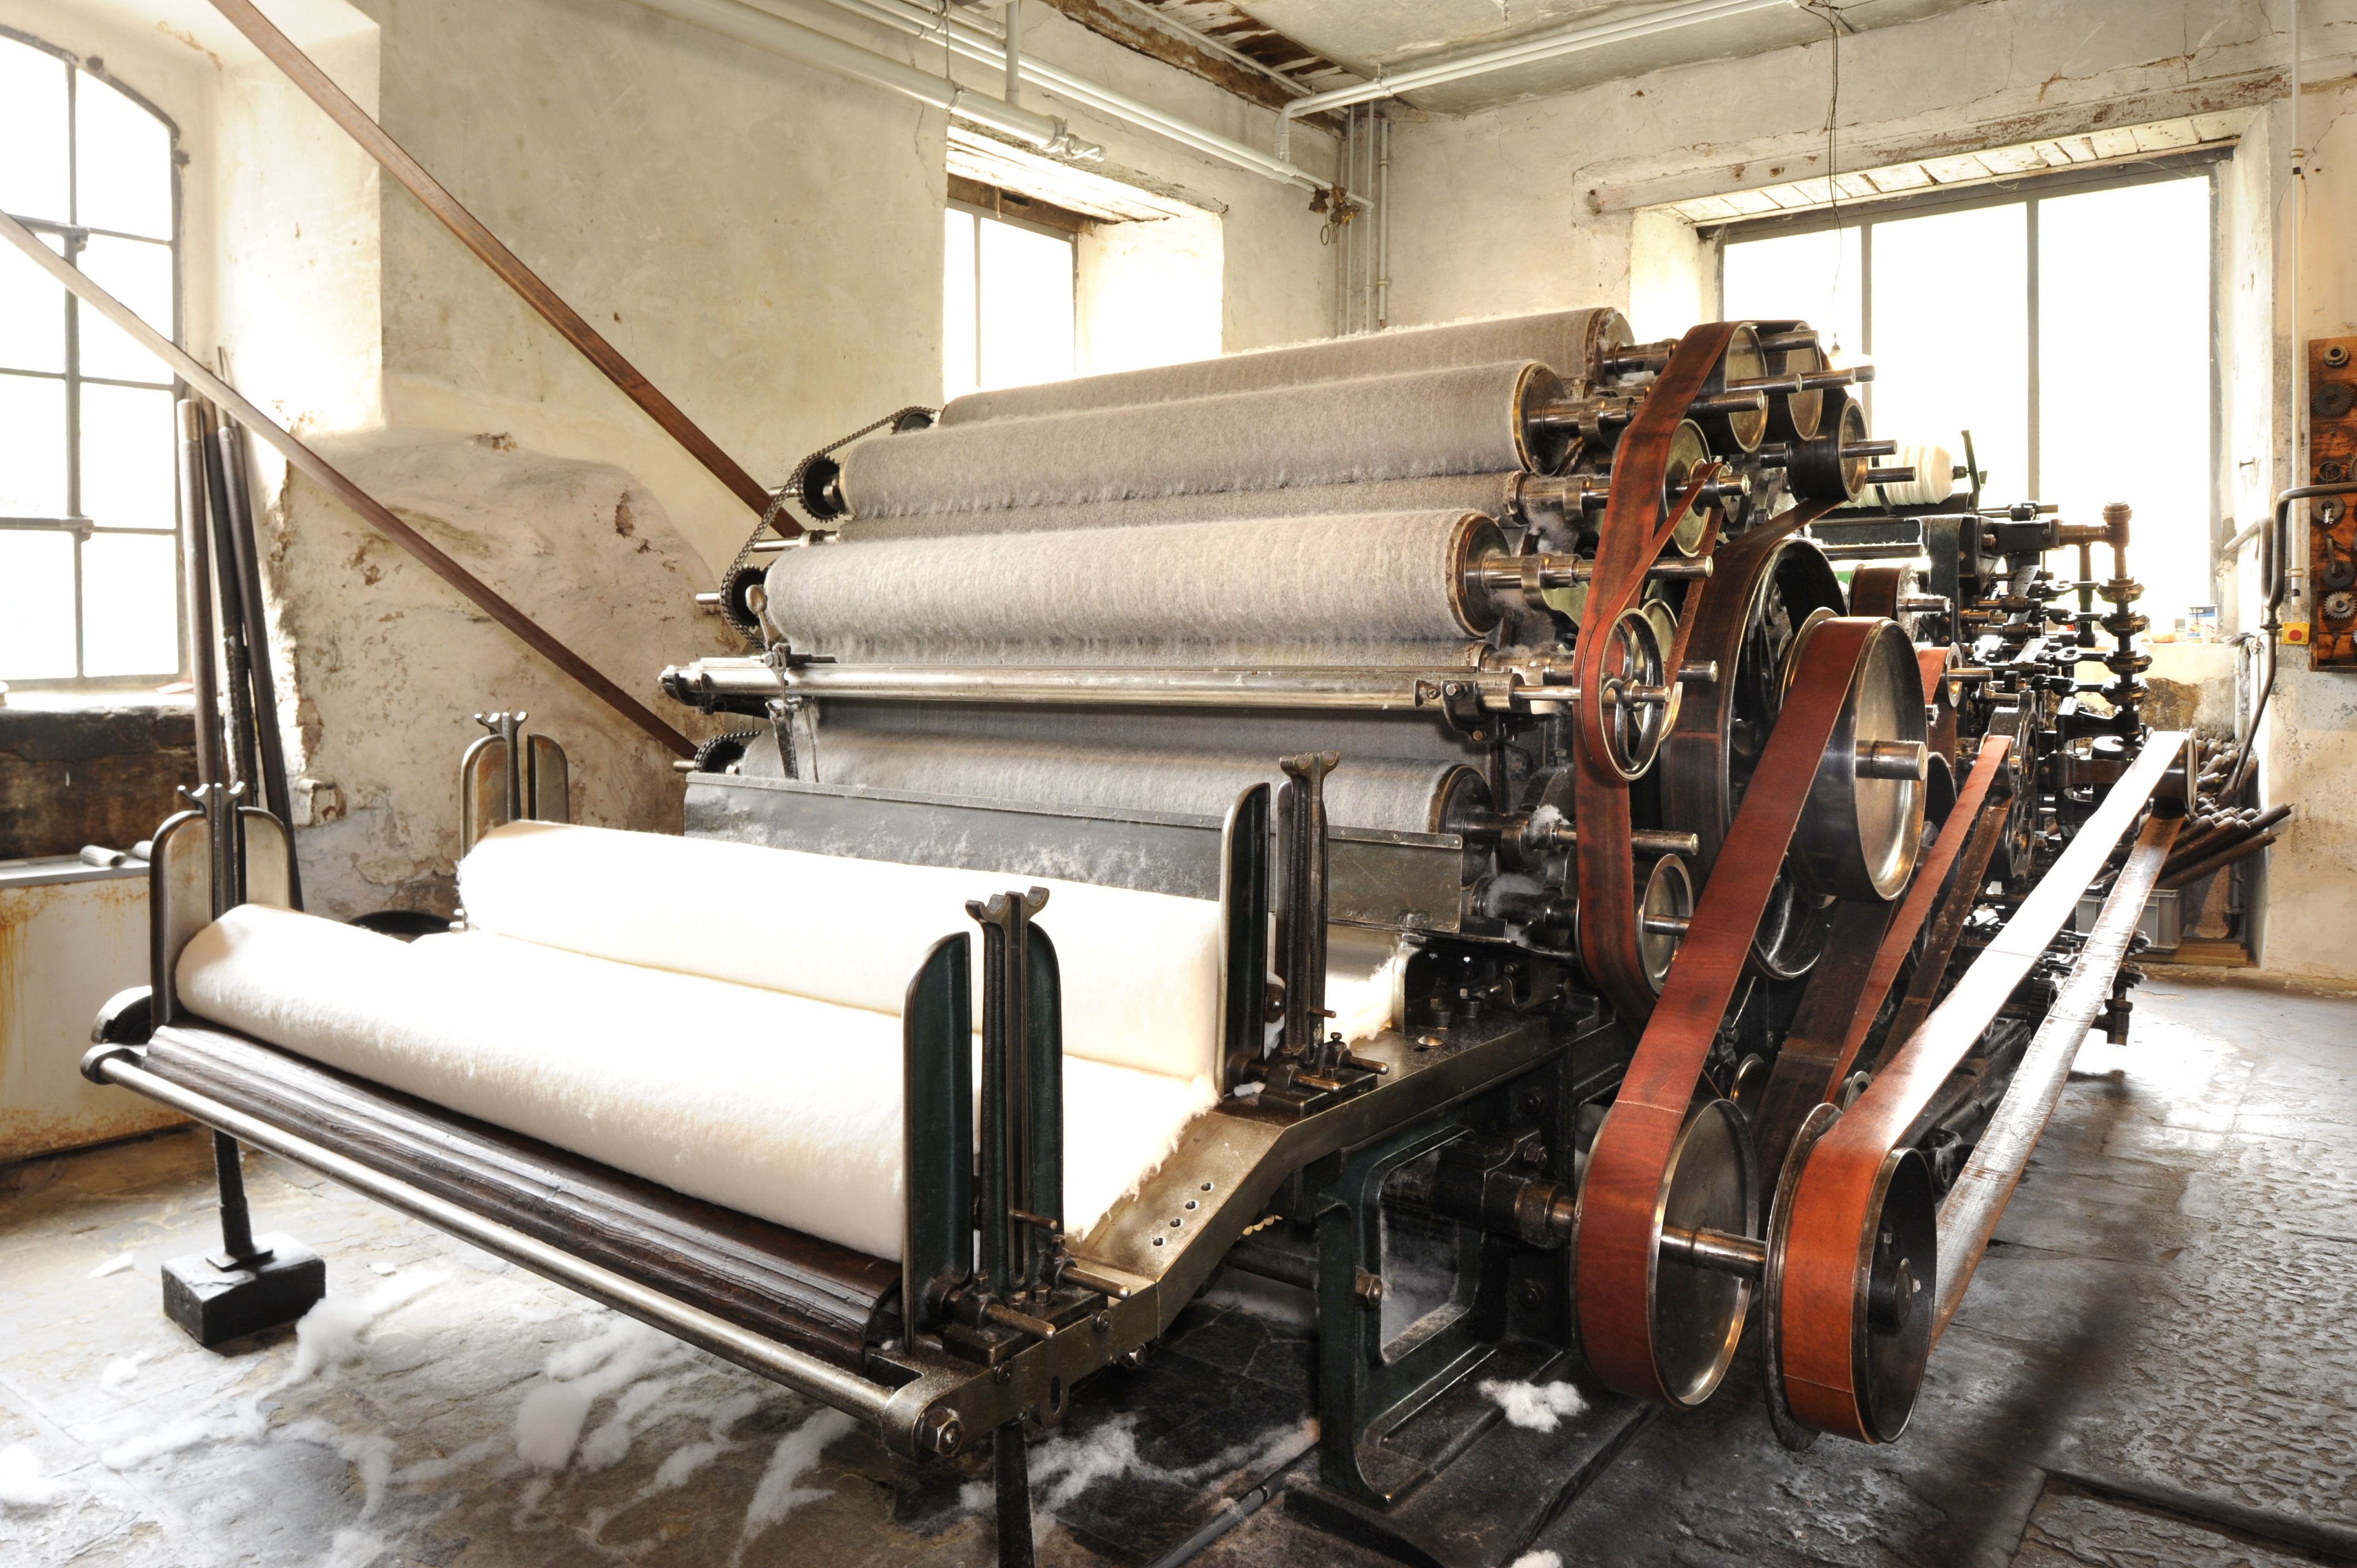 Finest wool fleece – Machine to produce rovings in the carding department. (Photo: Georg Helmes)